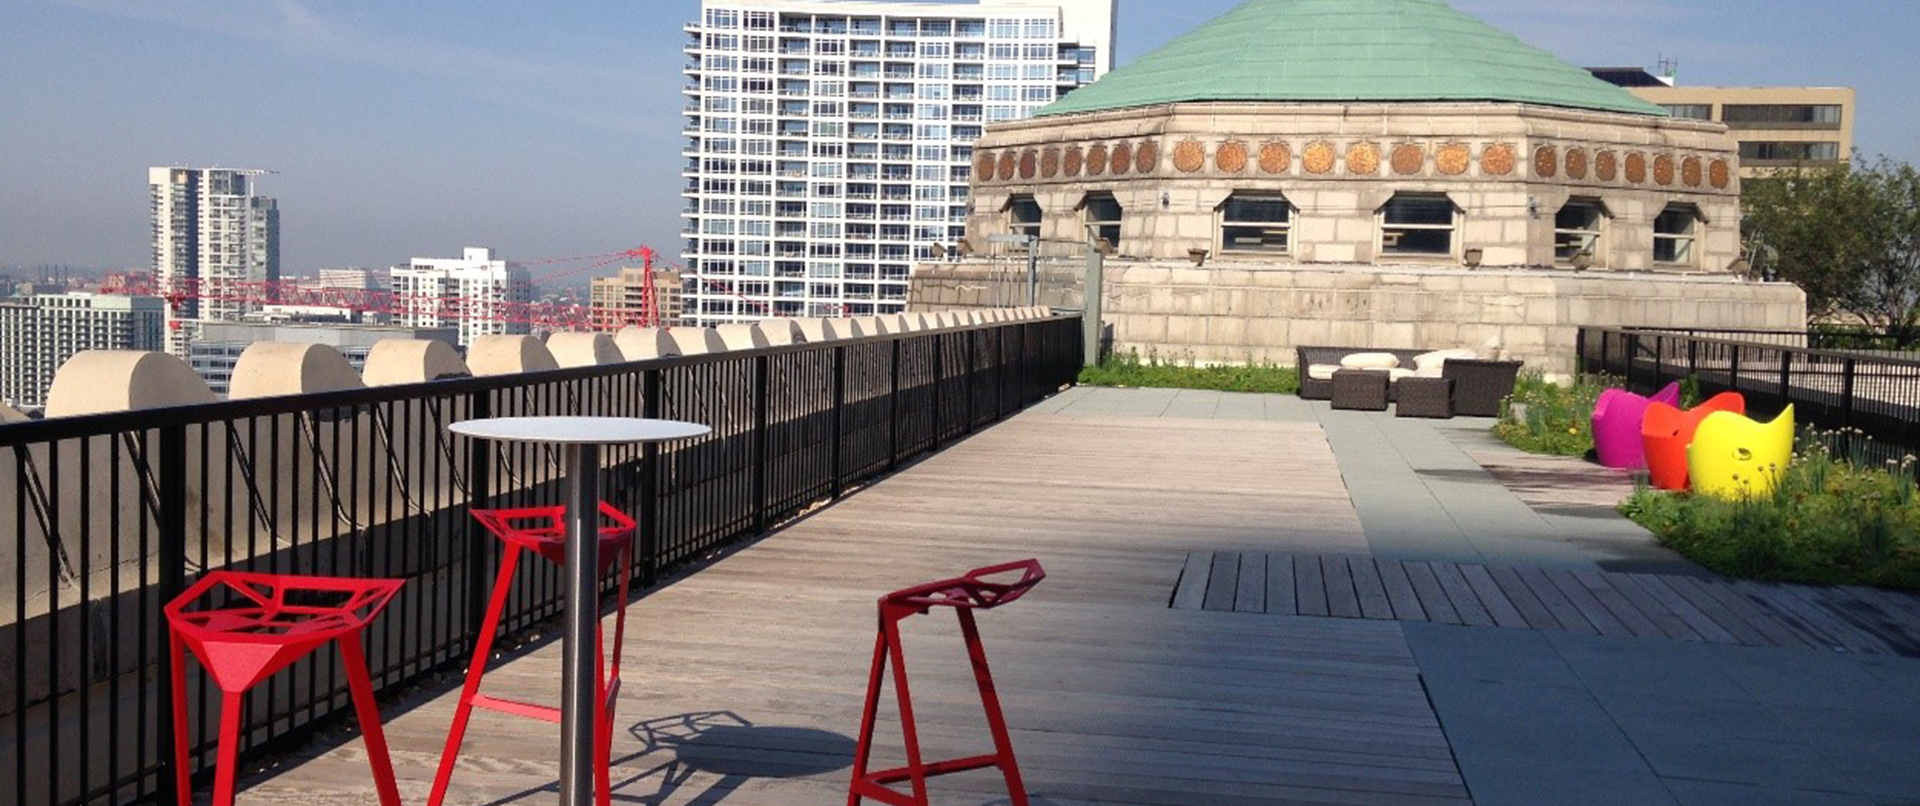 Urban Rooftop Seating Area